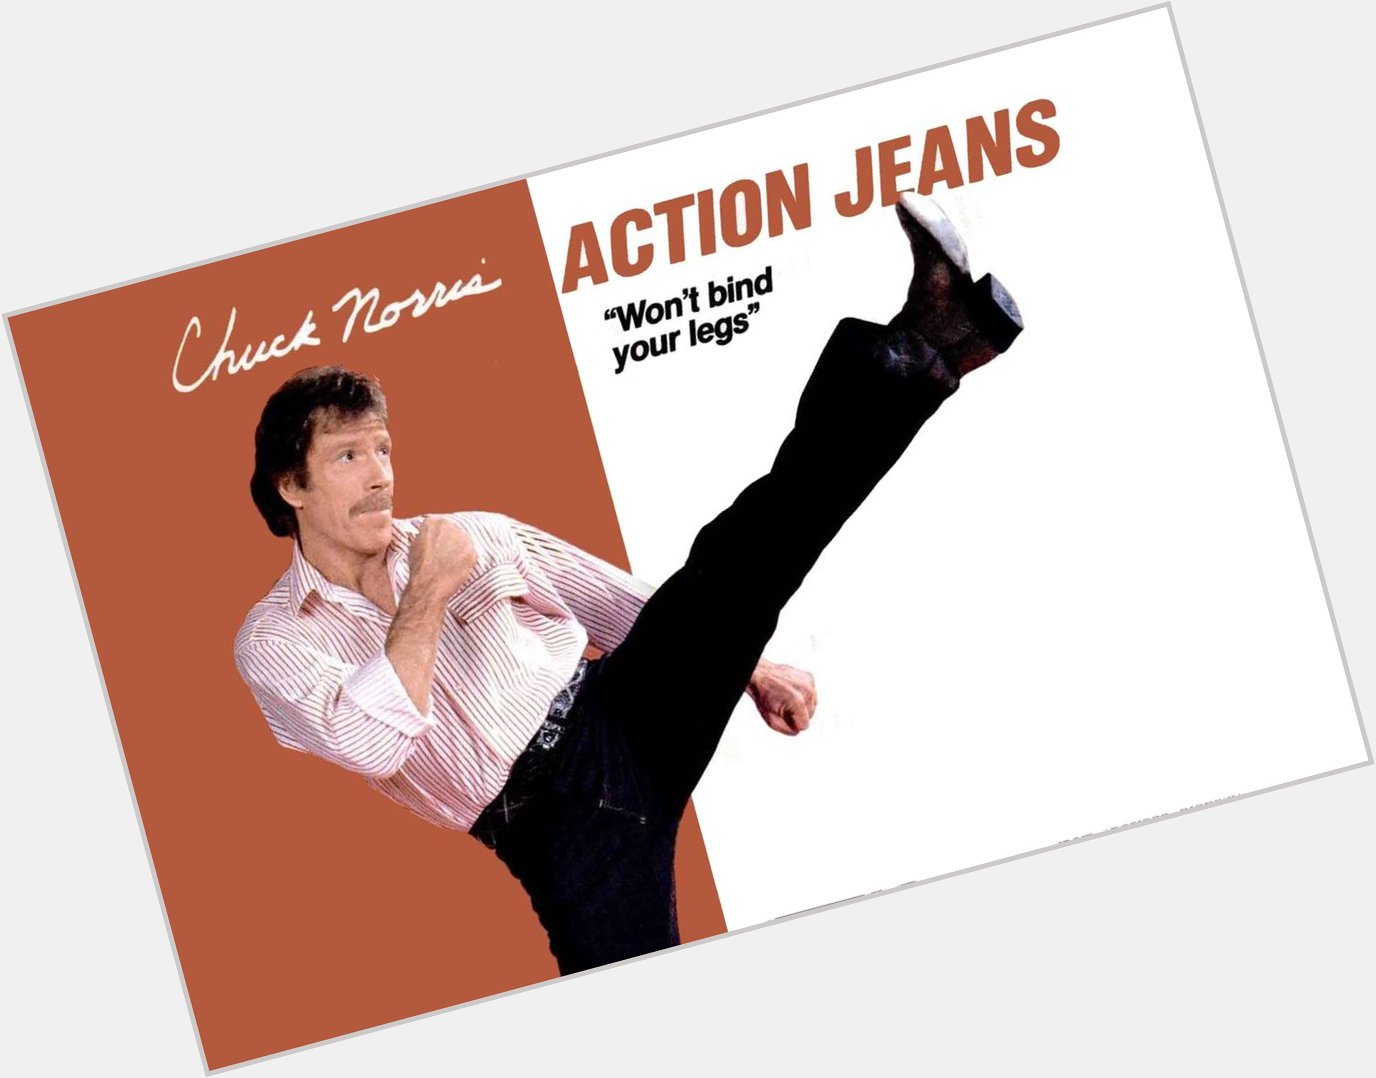 Happy 80th birthday to the inventor of Action Jeans, CHUCK NORRIS. 